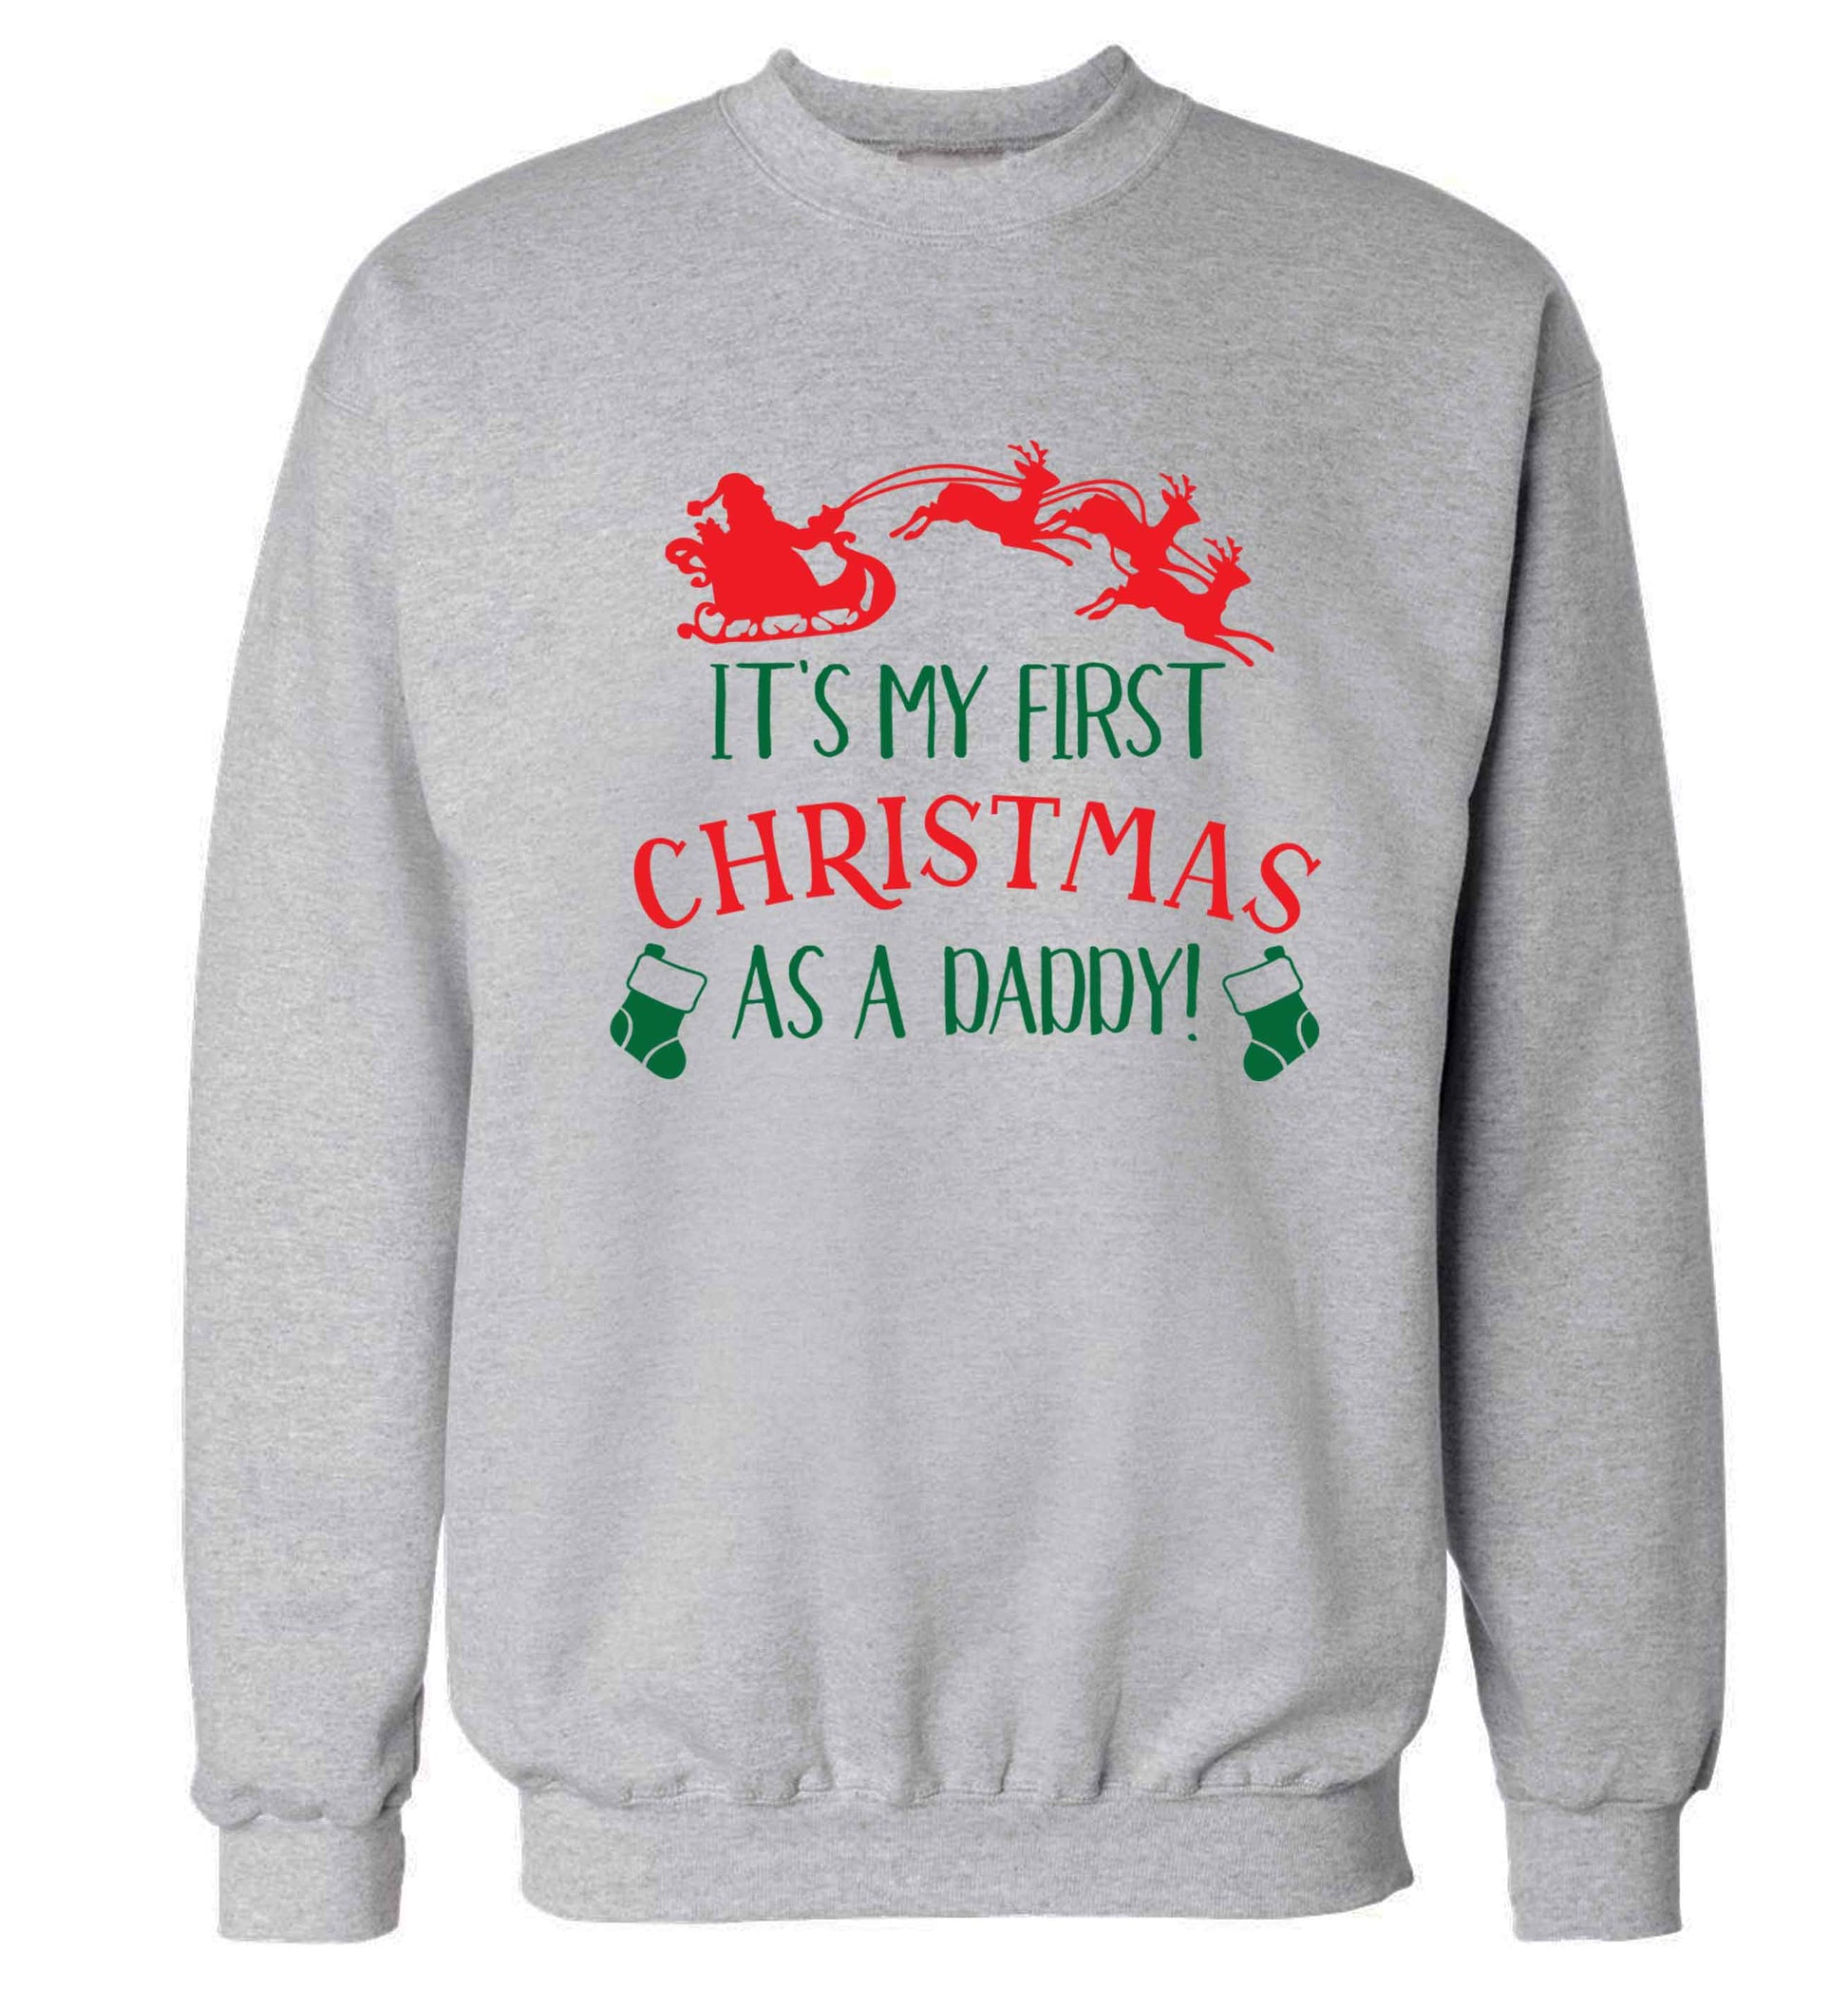 It's my first Christmas as a daddy Adult's unisex grey Sweater 2XL